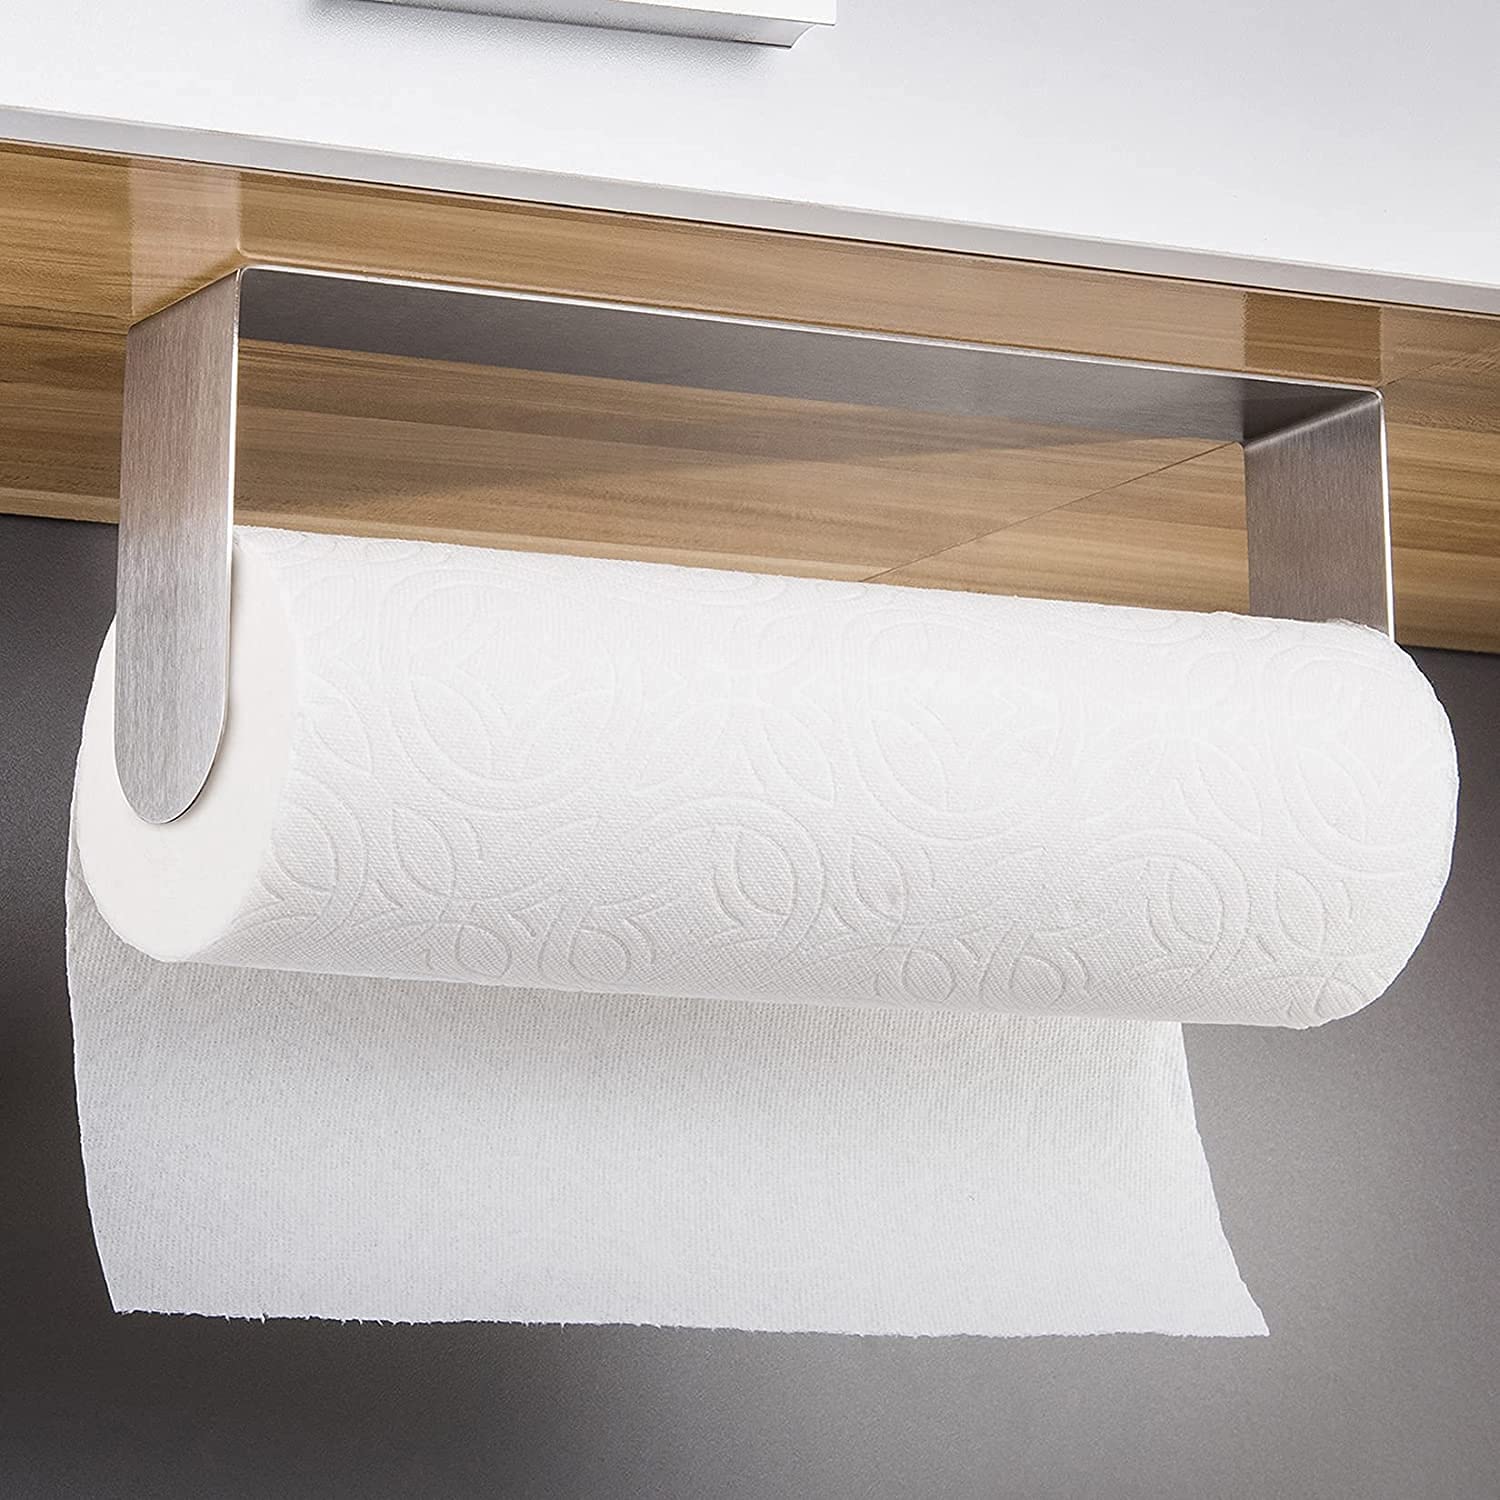 Smartake Paper Towel Holder With Adhesive Under Cabinet, Wall